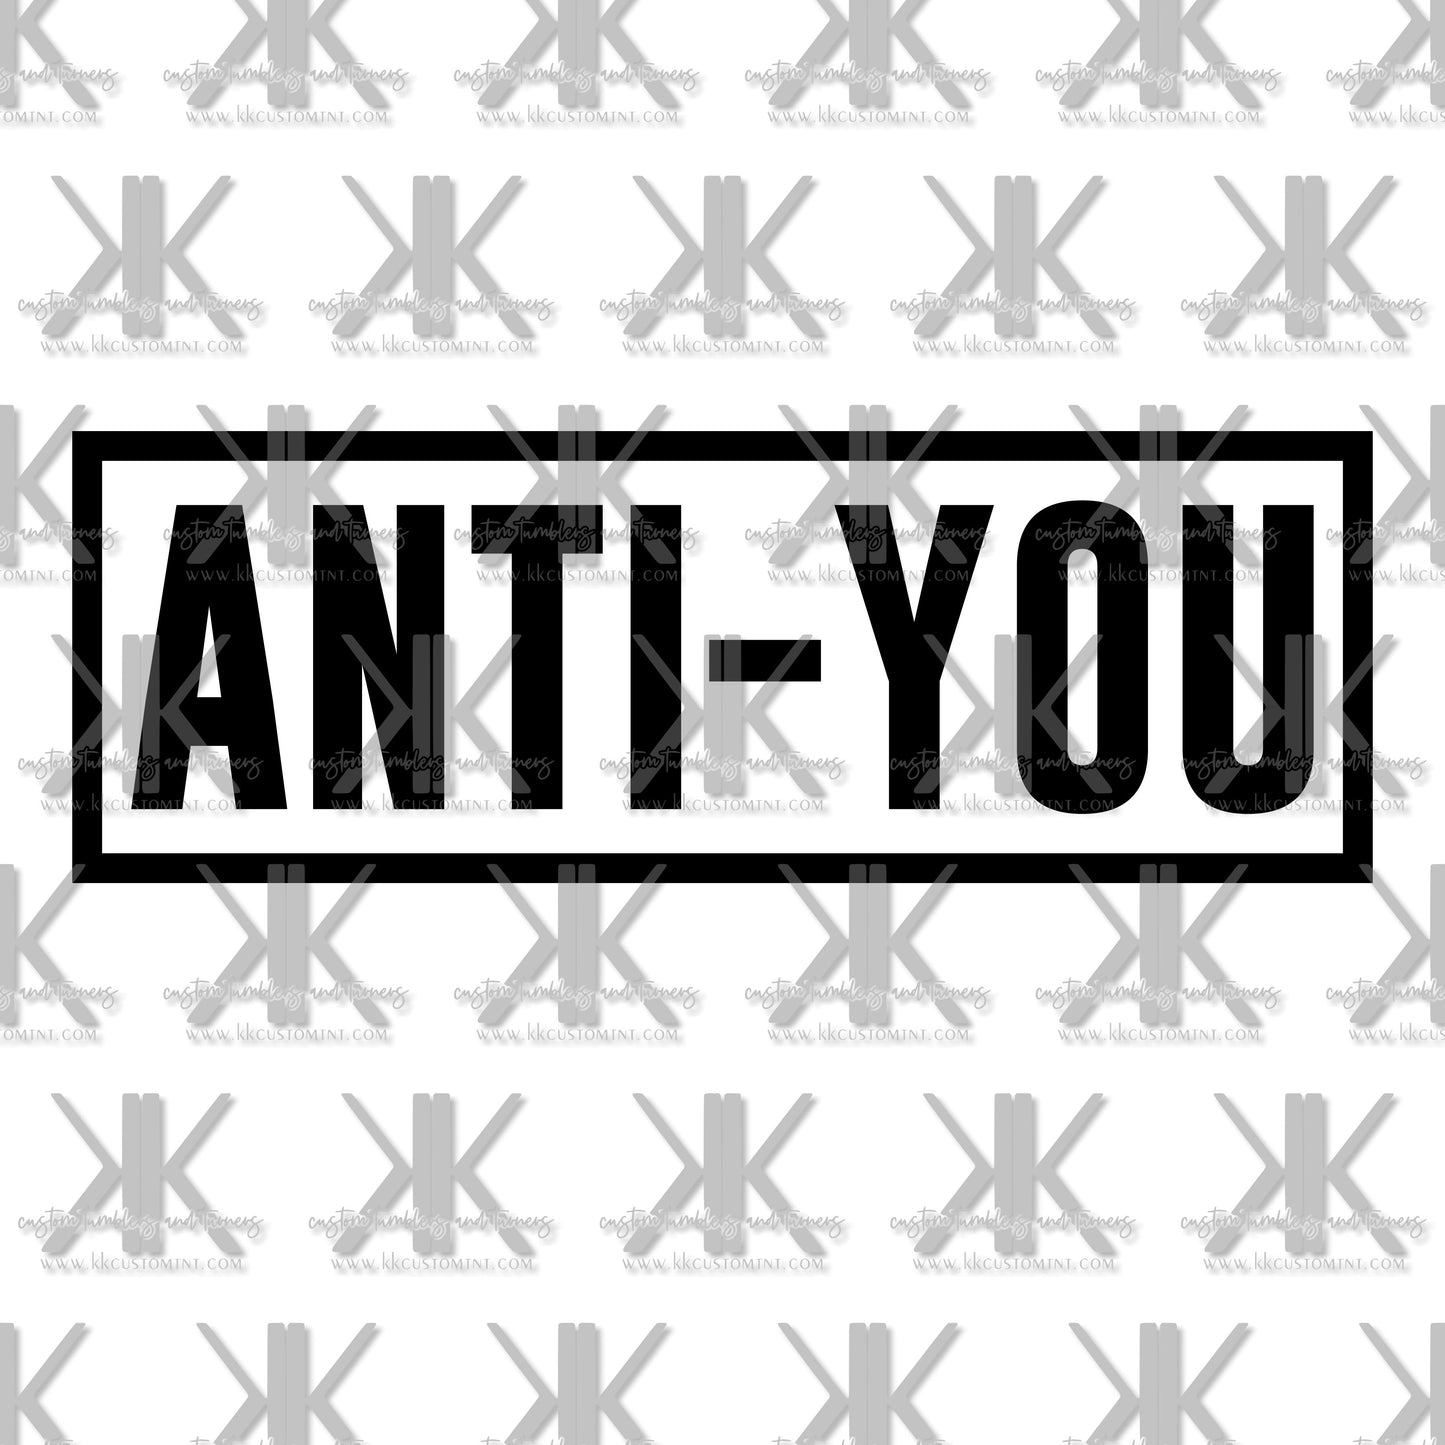 ANTI-YOU  DTF